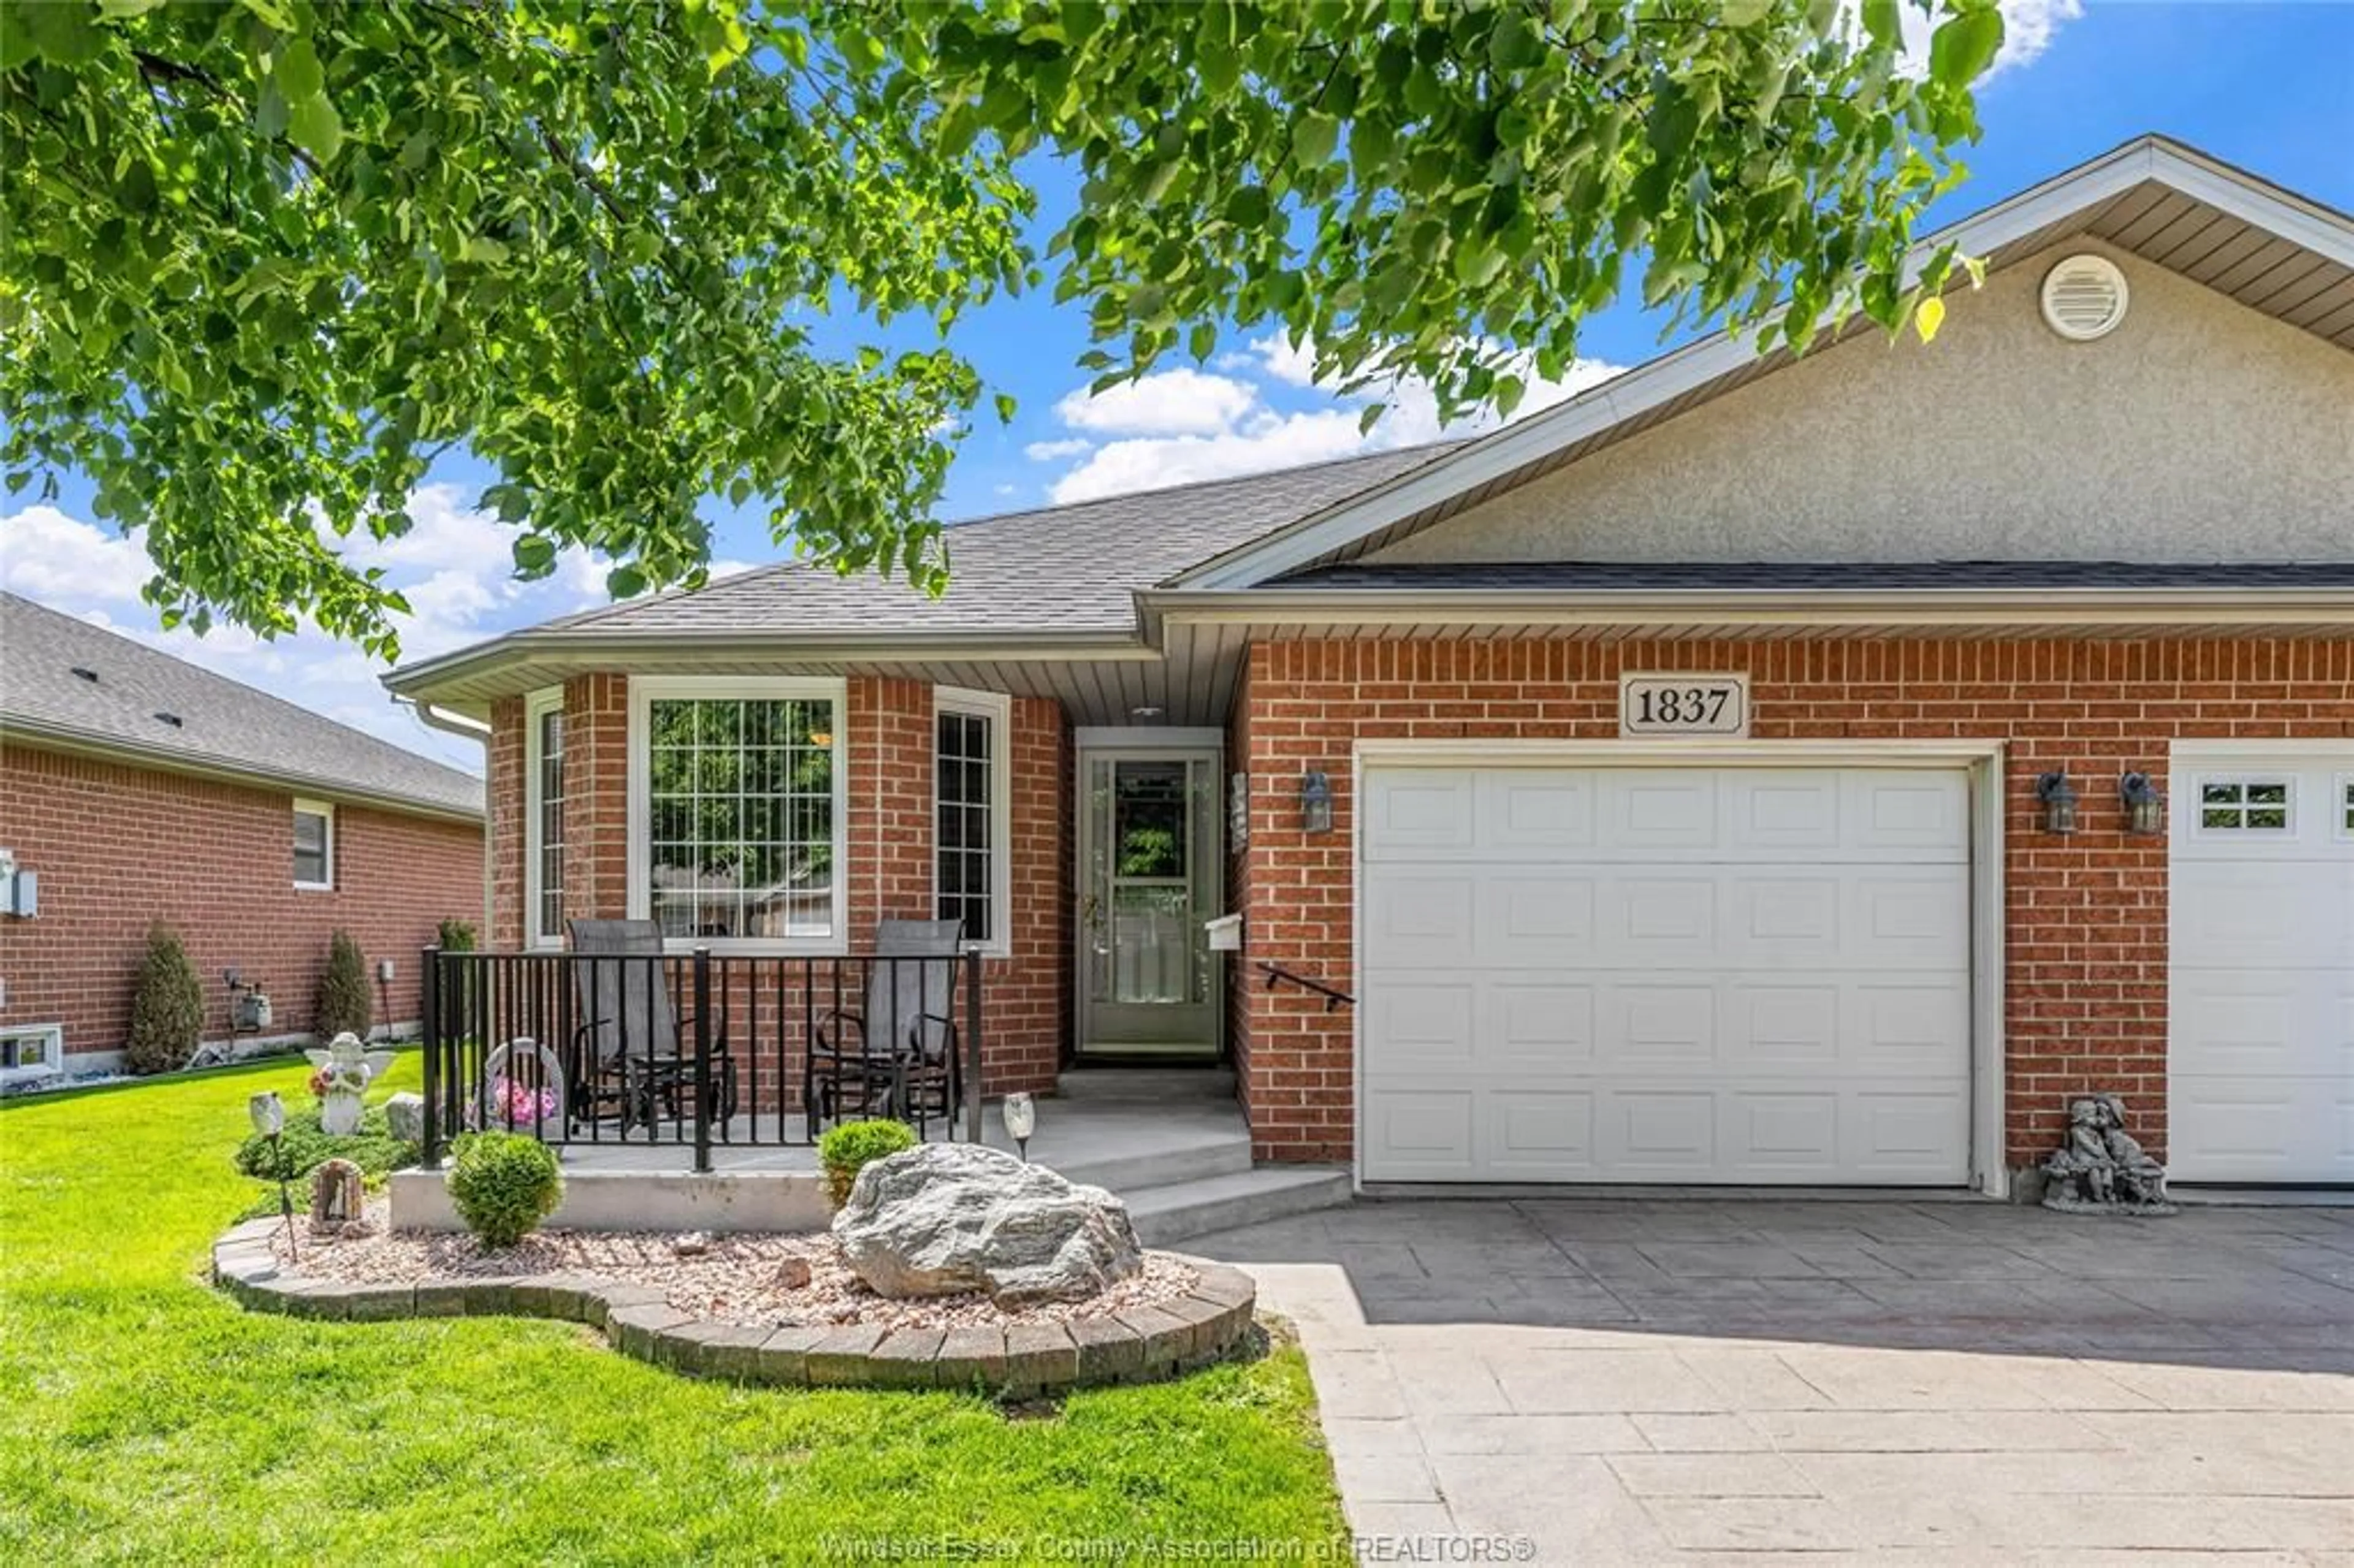 Home with brick exterior material for 1837 QUESTA, Windsor Ontario N8P 1M5